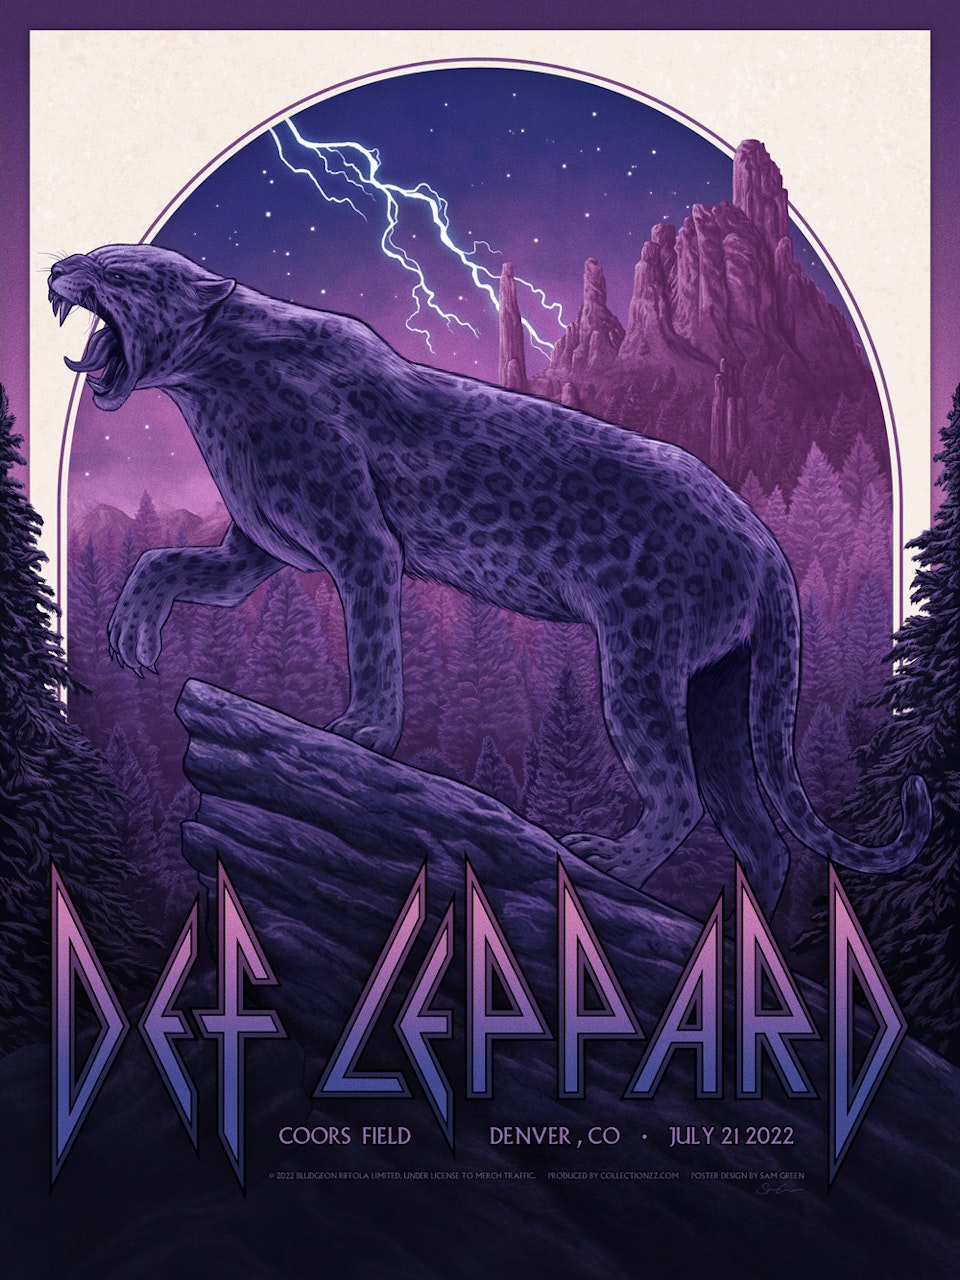 Def Leppard - Official concert poster - Official concert poster I designed and illustrated for legendary rock band, Def Leppard.

This poster was designed for the first night of the American leg of his ‘Farewell Yellow Brick Road’ stadium tour, kicking off at Citizens Bank Park in Philadelphia, PA.

This poster is for the July 21st, 2022 show in Coors Field stadium in Denver, Colorado. Featured in my poster is the titular leopard roaming in the rocky Colorado landscape, with the famous Garden of the Gods rock formations looming over amidst a thunderstorm.